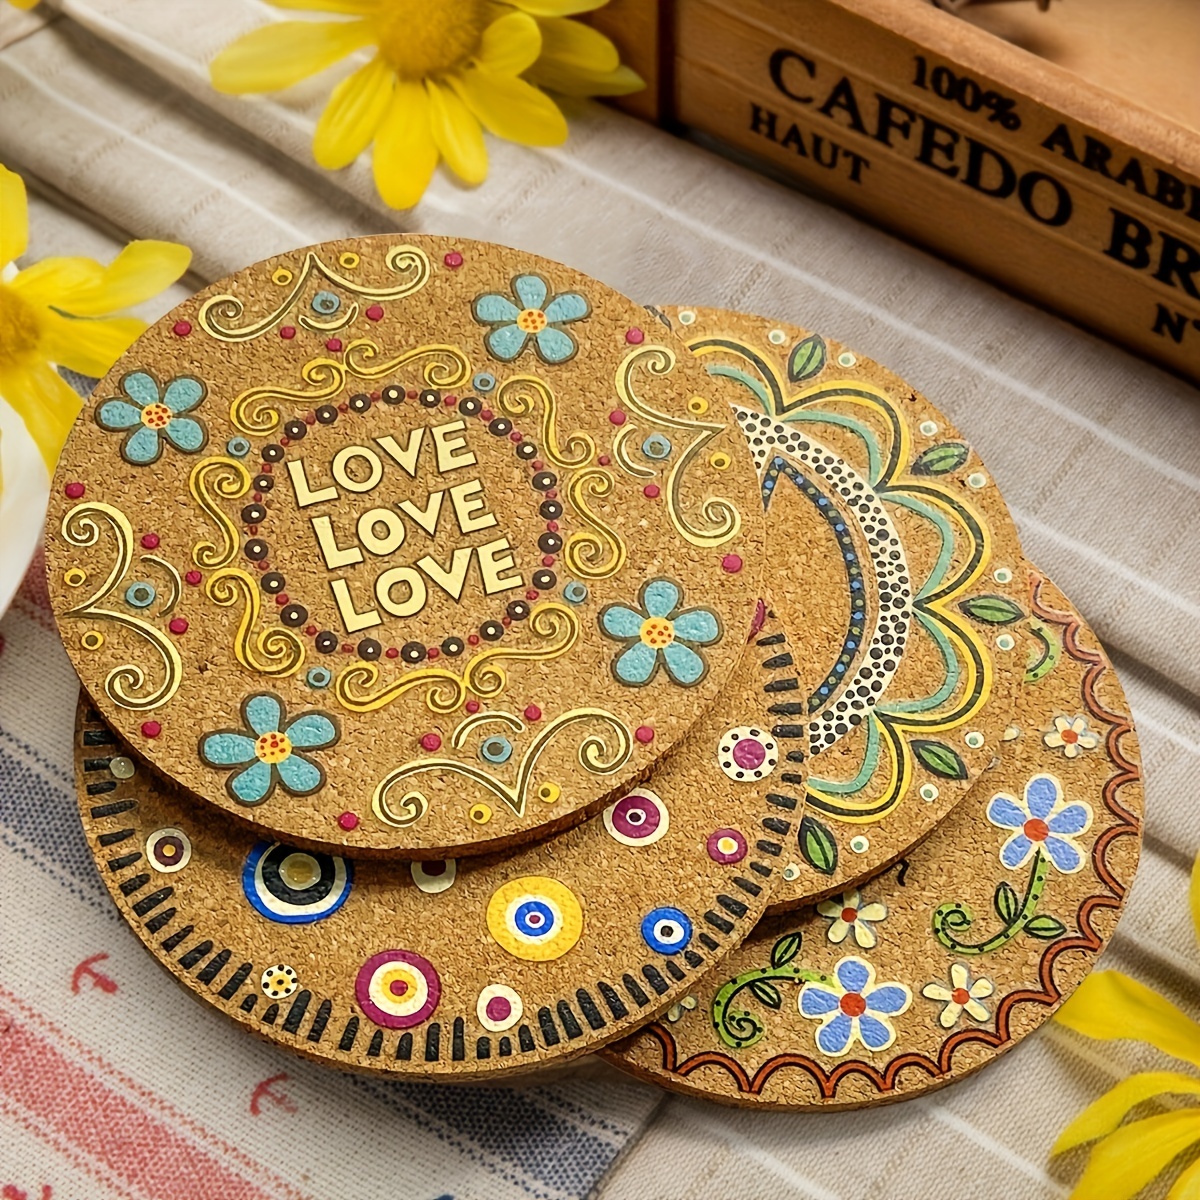 24 Pcs Thick Flower Coasters Cork Coasters for Drinks 4 Inch Absorbent  Reusable Coaster Farmhouse Rustic Wood Drink Coasters for Coffee Wine Mug  Desk